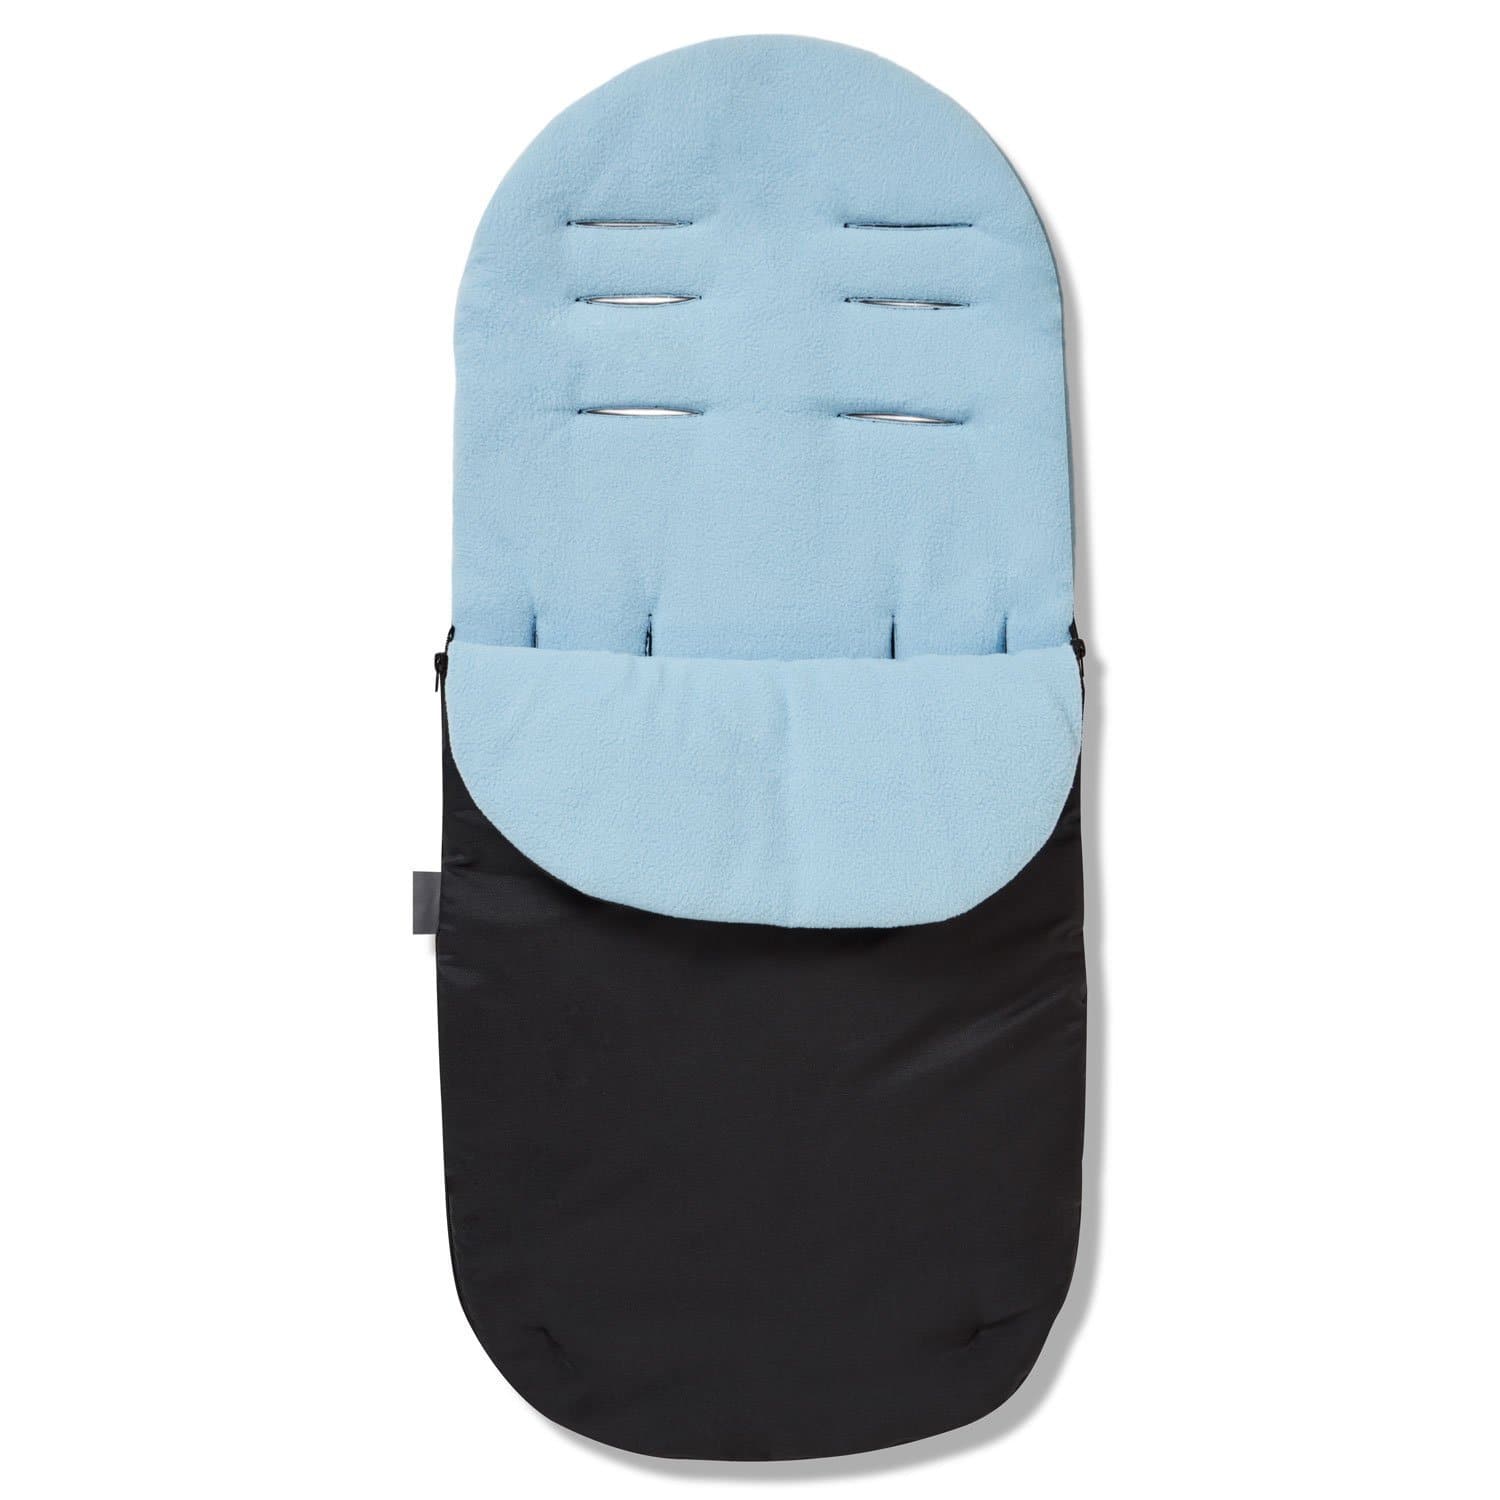 Footmuff / Cosy Toes Compatible with Zeta - For Your Little One